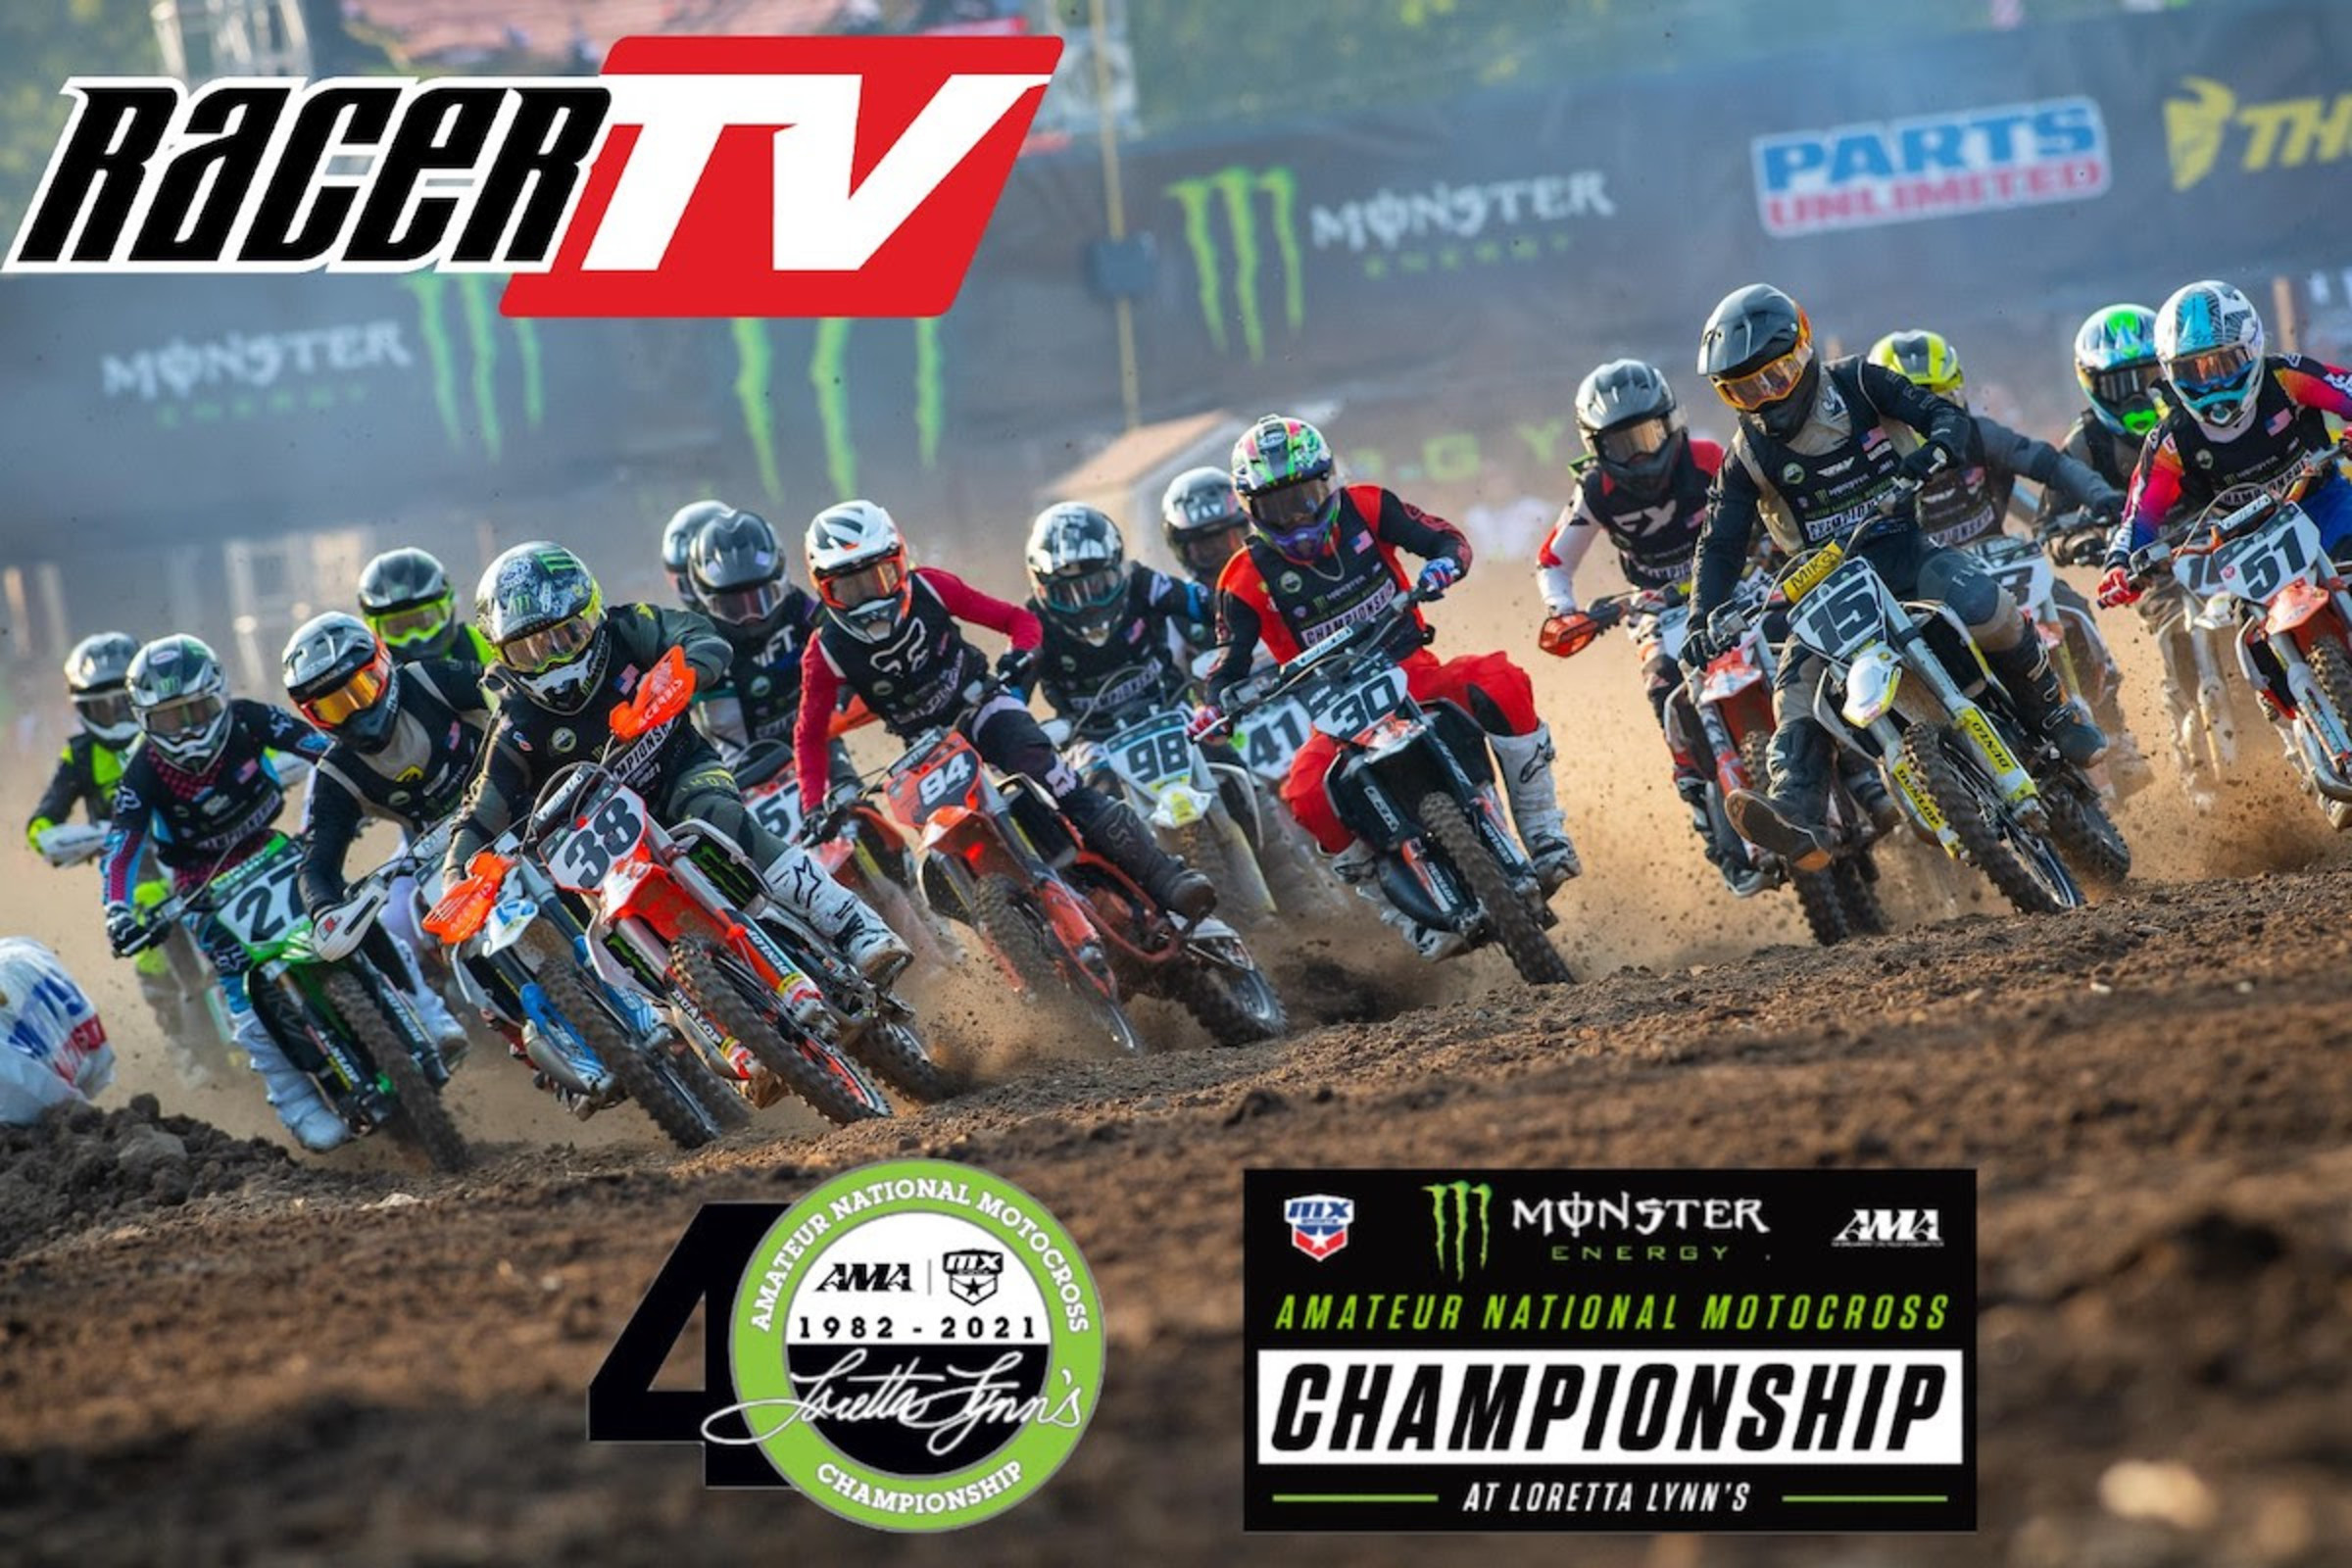 Watch as Champions are Crowned at Loretta Lynns Exclusively on Racer TV